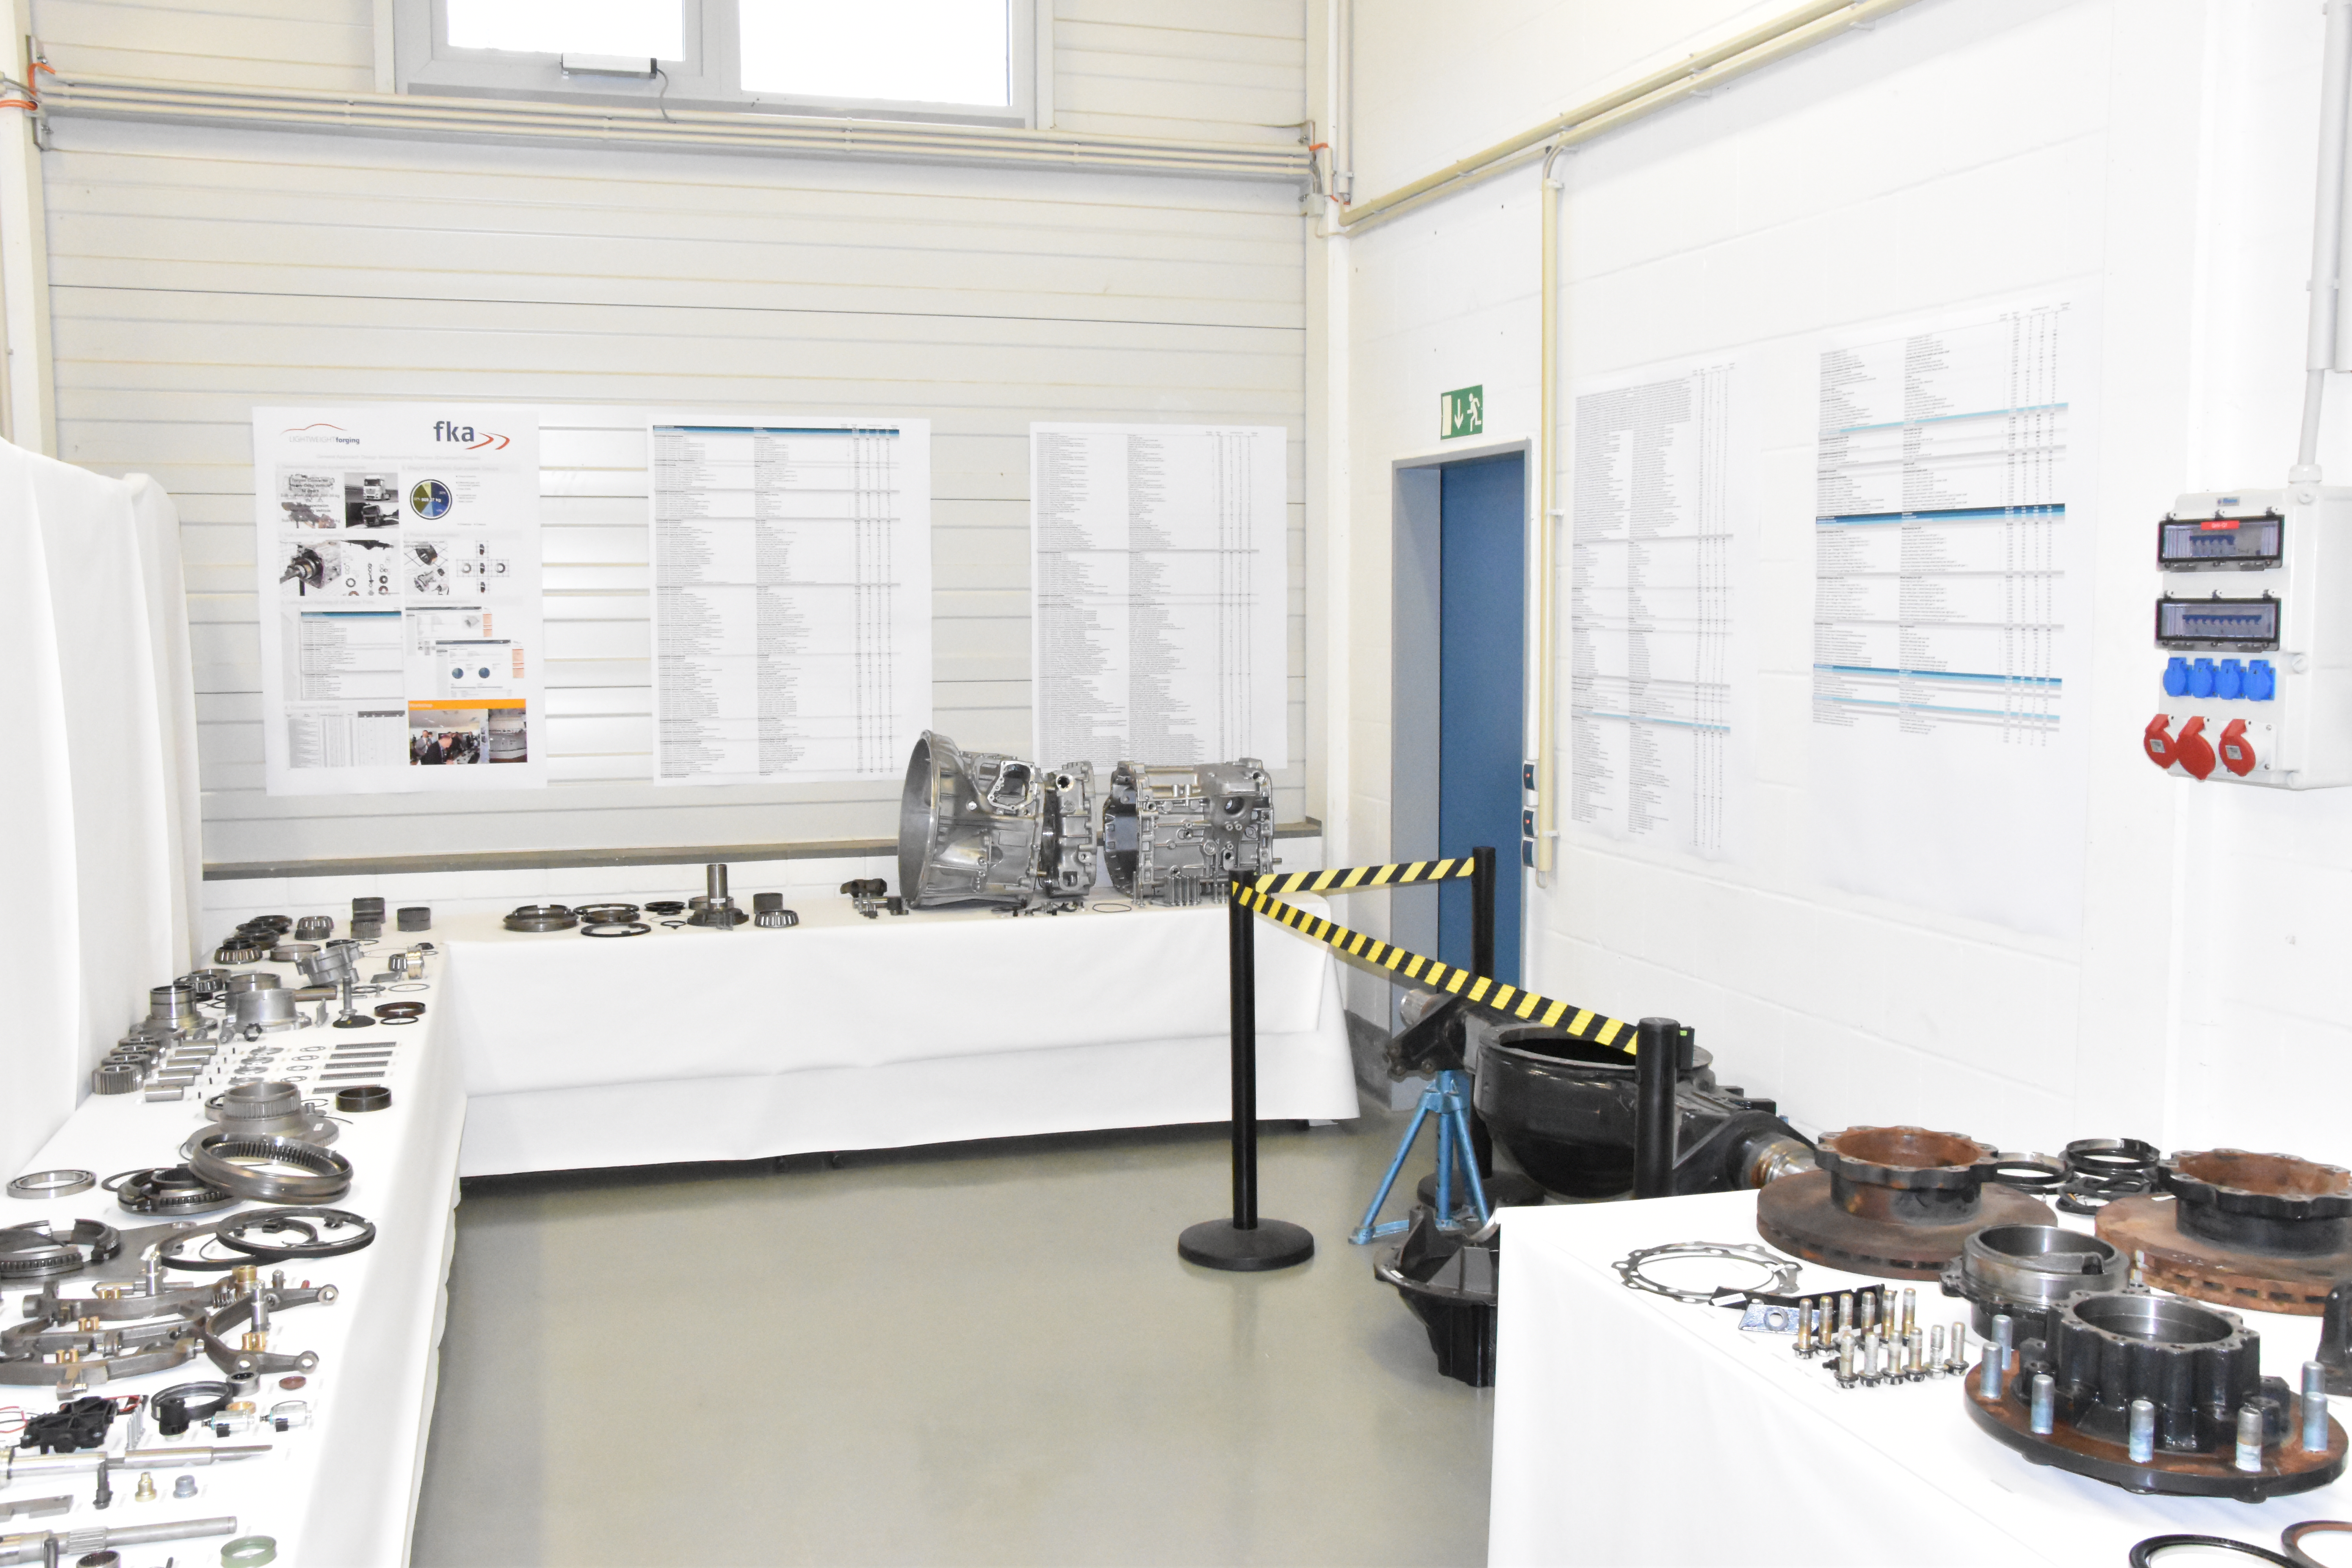 Exhibition Commercial Vehicle Components